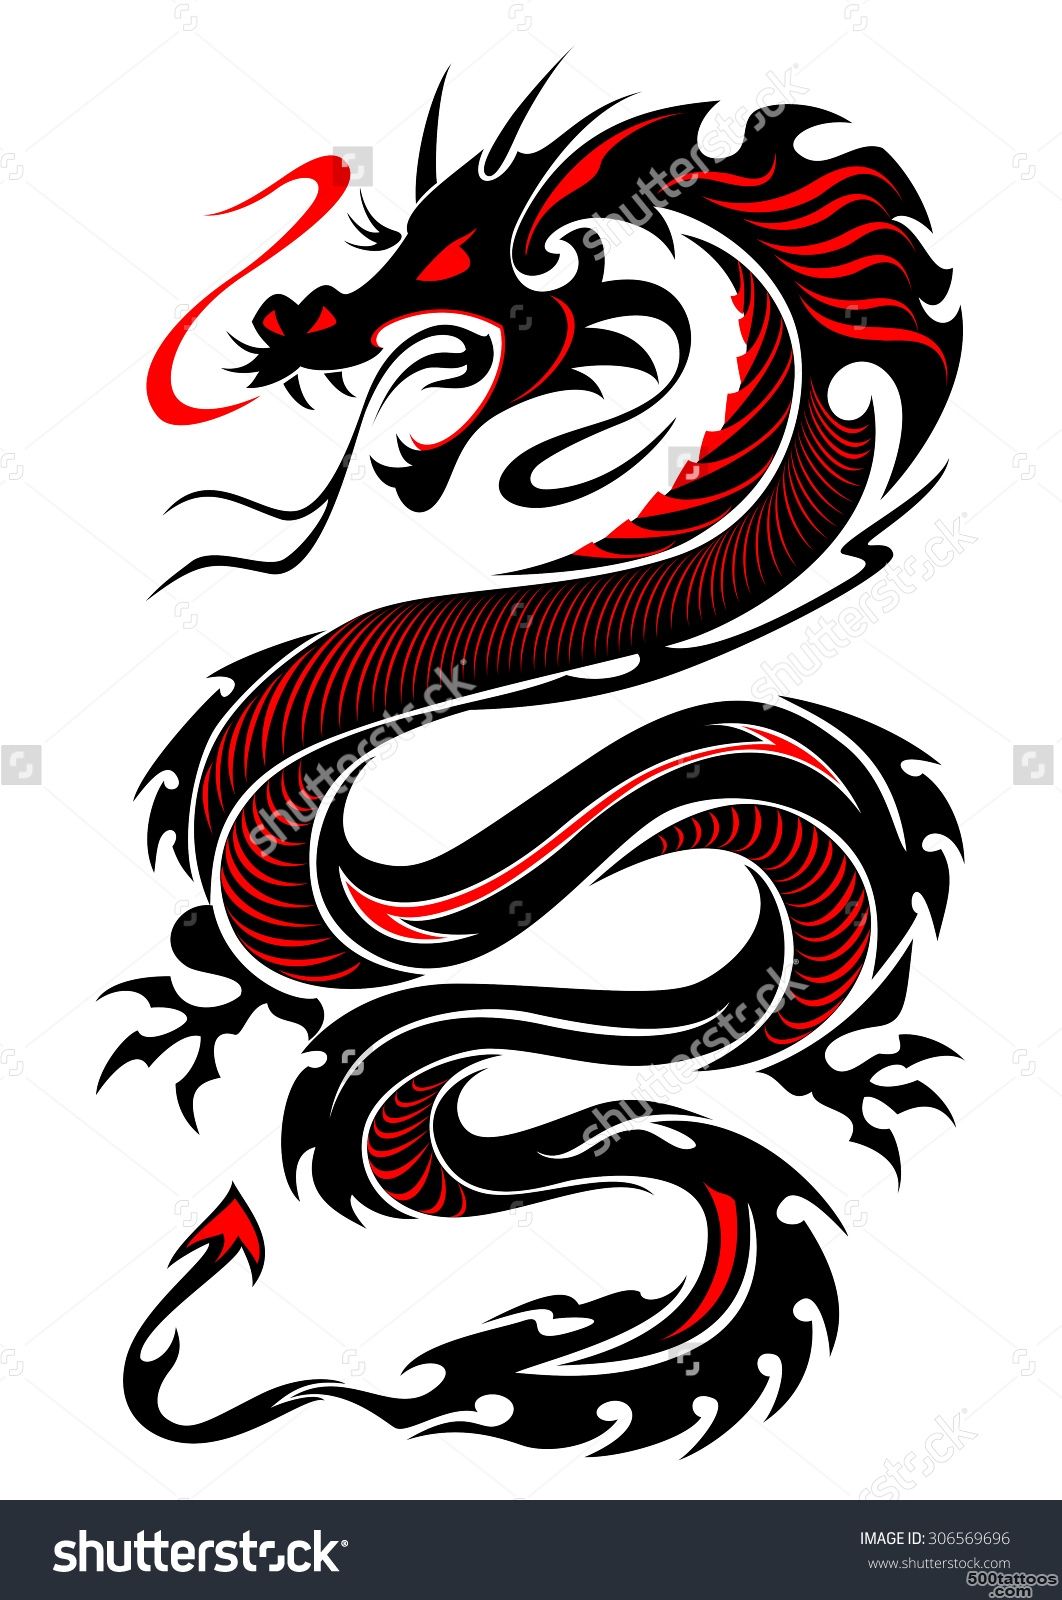 Flaming Tribal Dragon Tattoo Vector Illustration In Black And Red ..._2